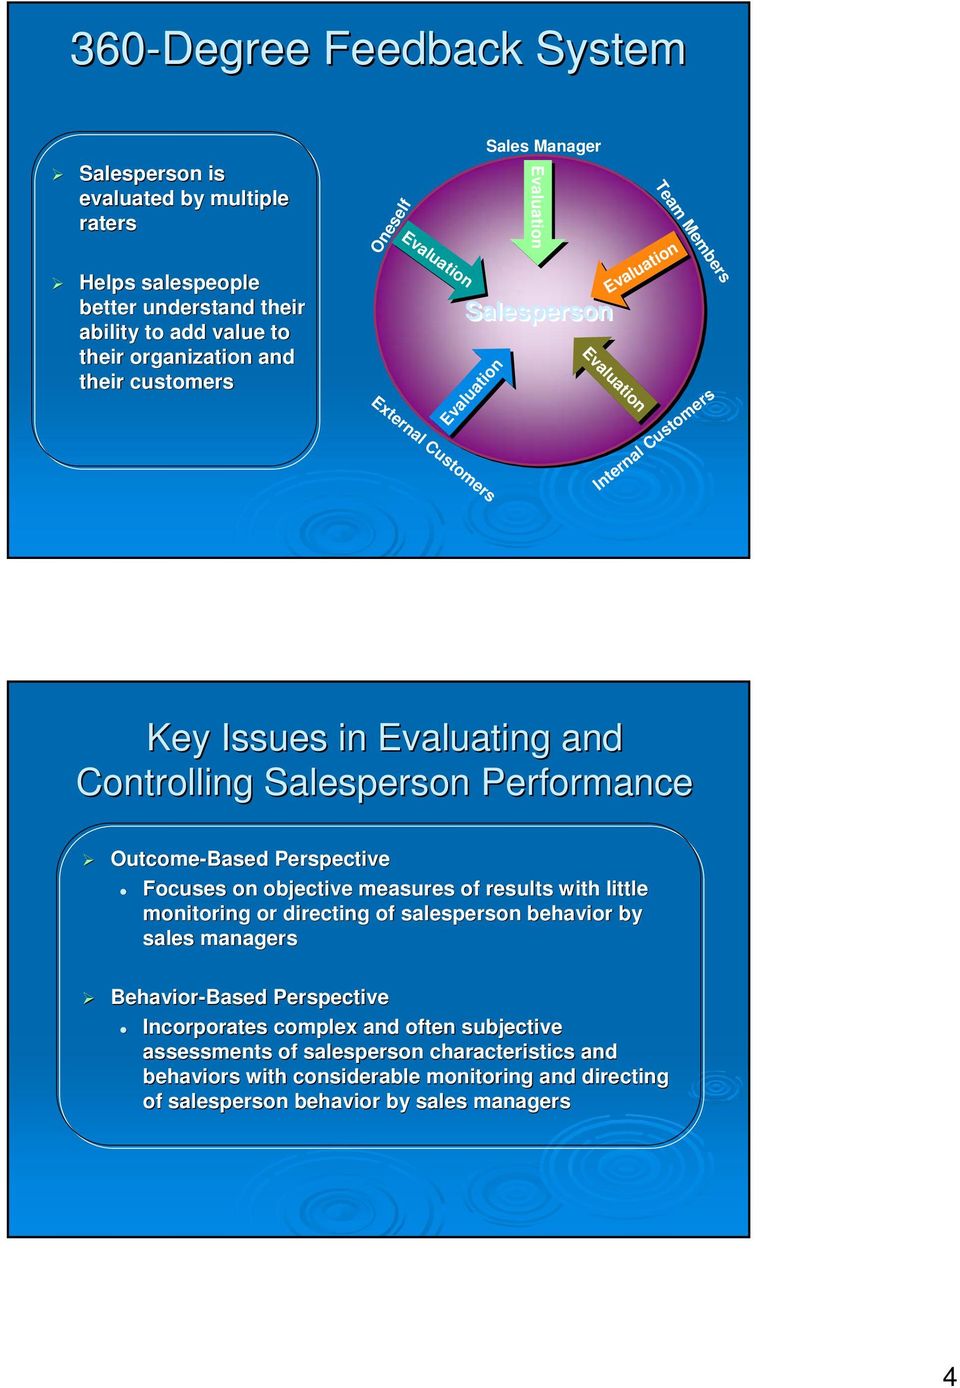 Salesperson Performance Outcome-Based Perspective Focuses on objective measures of results with little monitoring or directing of salesperson behavior by sales managers Behavior-Based Based